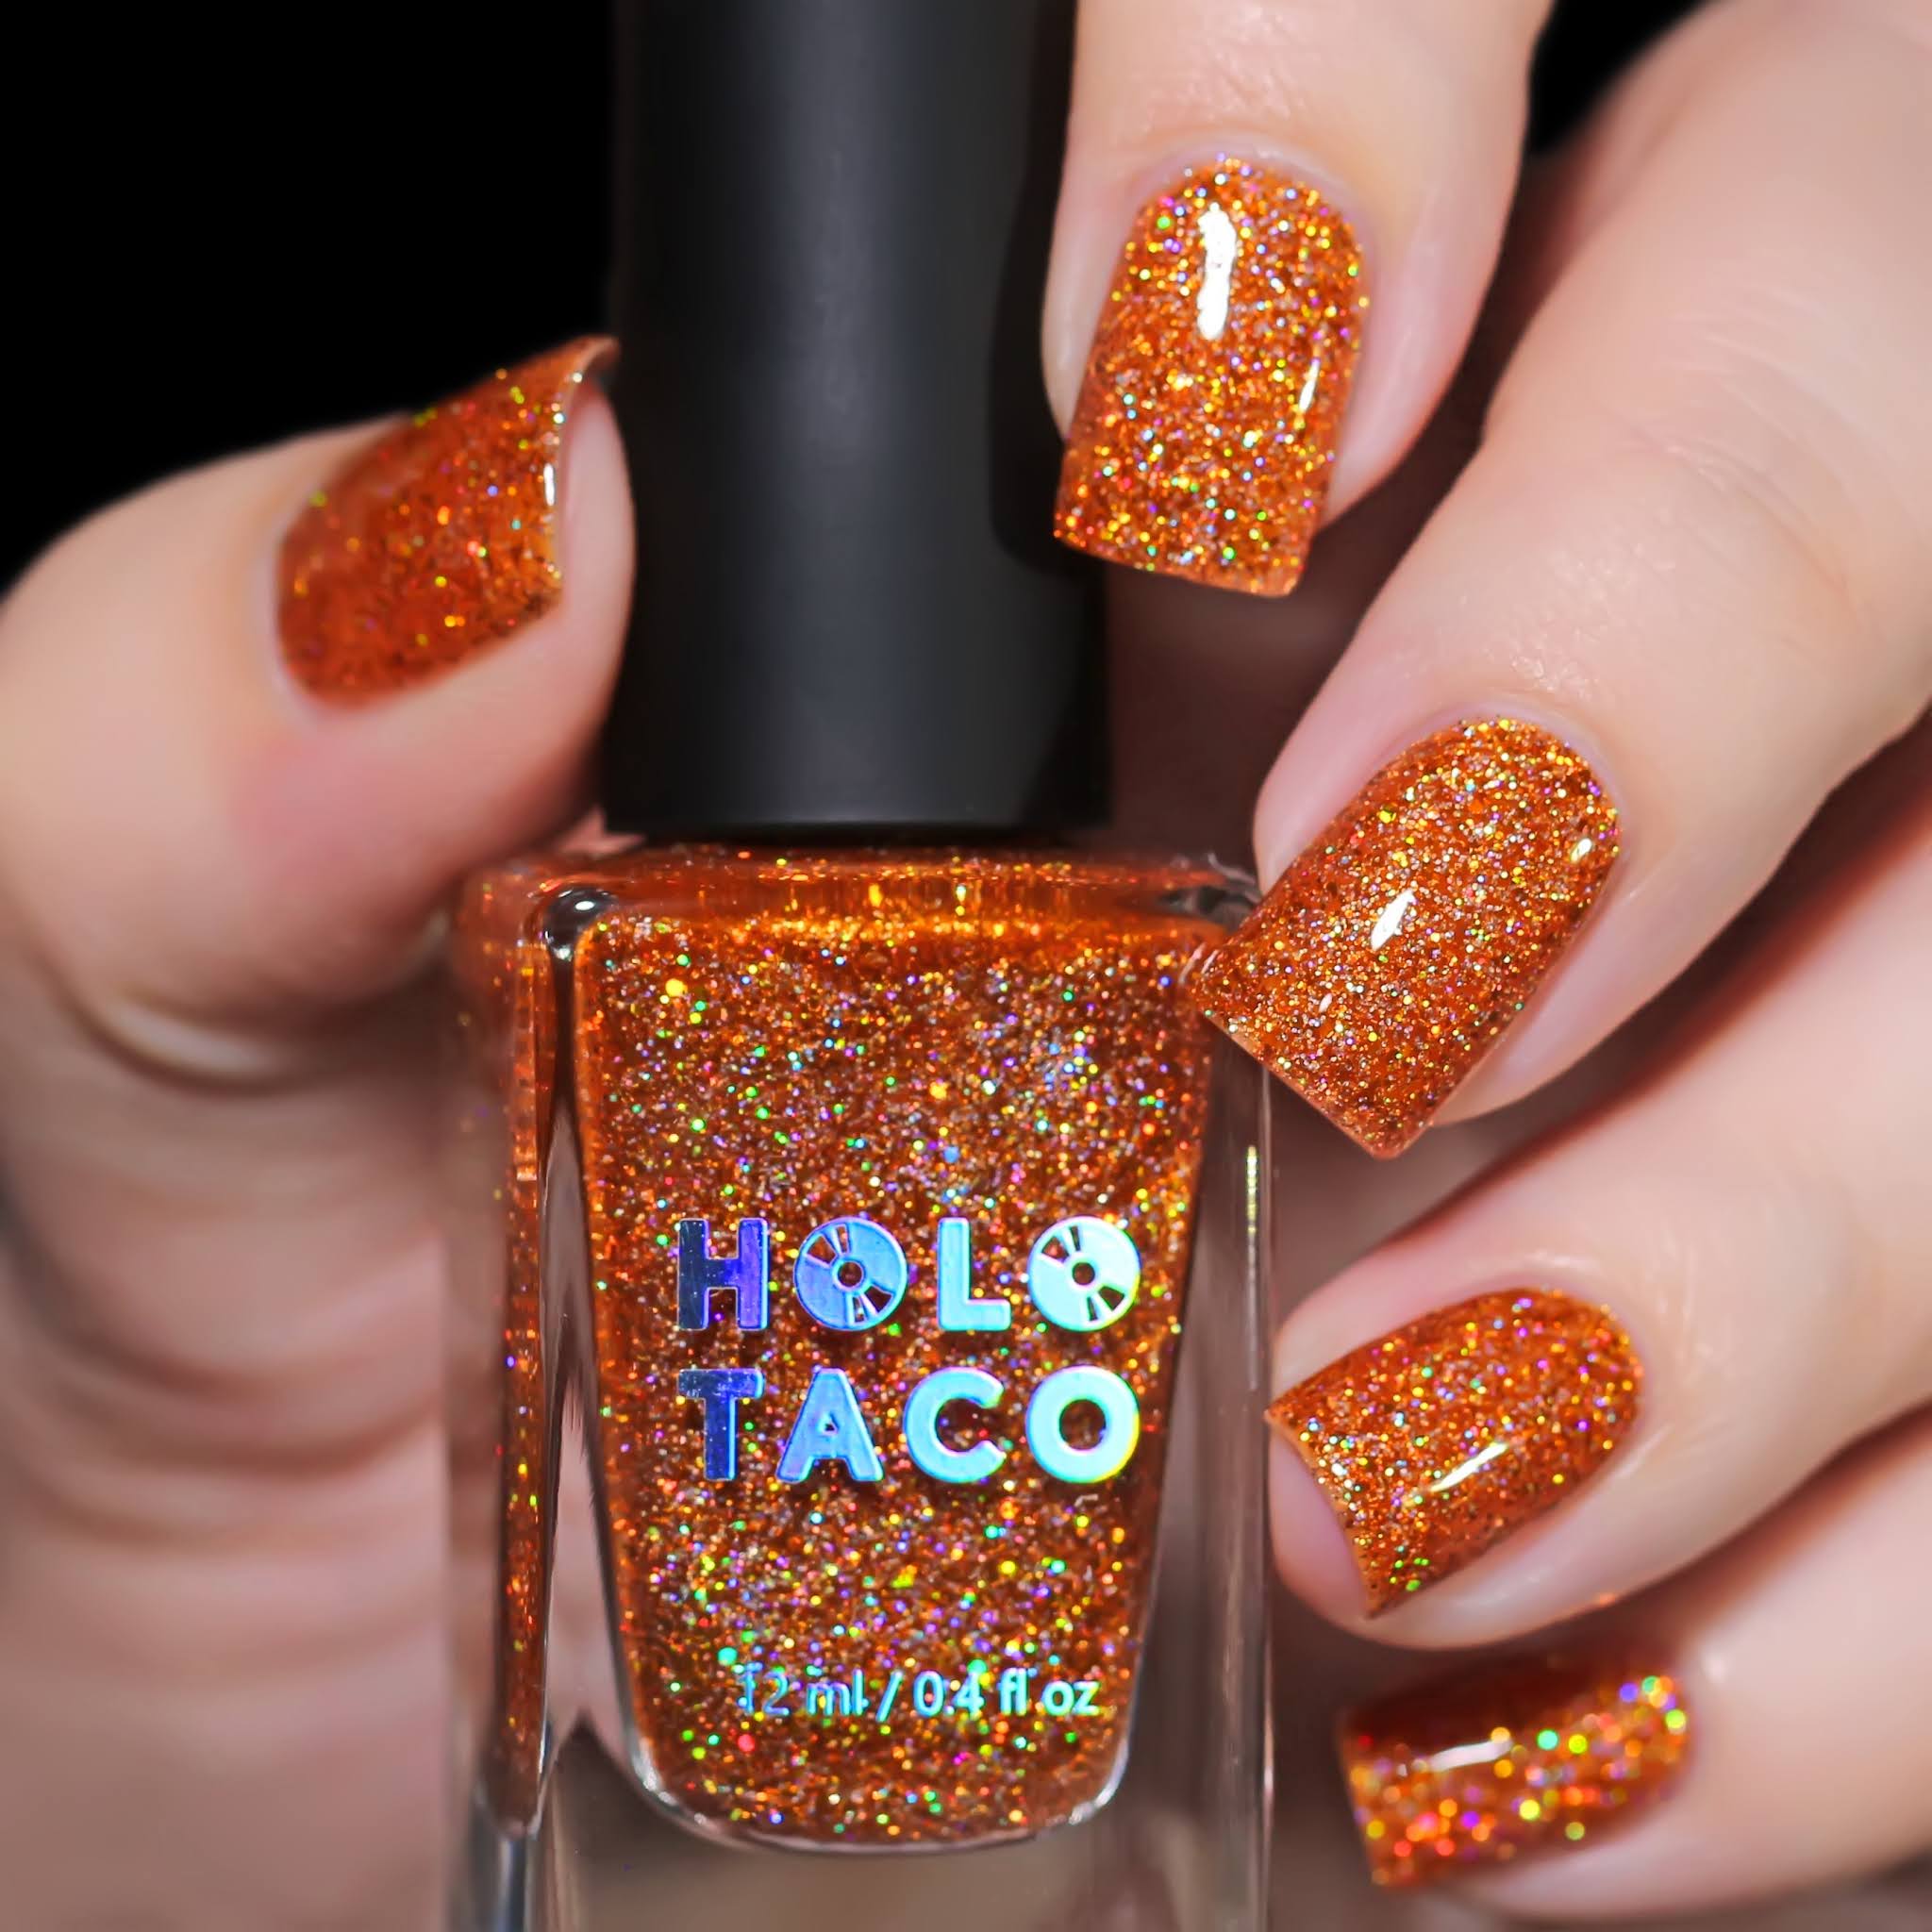 OPEN] Holo Taco Group Order GO Nail Polish Help To Buy Share Free Shipping,  Beauty & Personal Care, Hands & Nails on Carousell